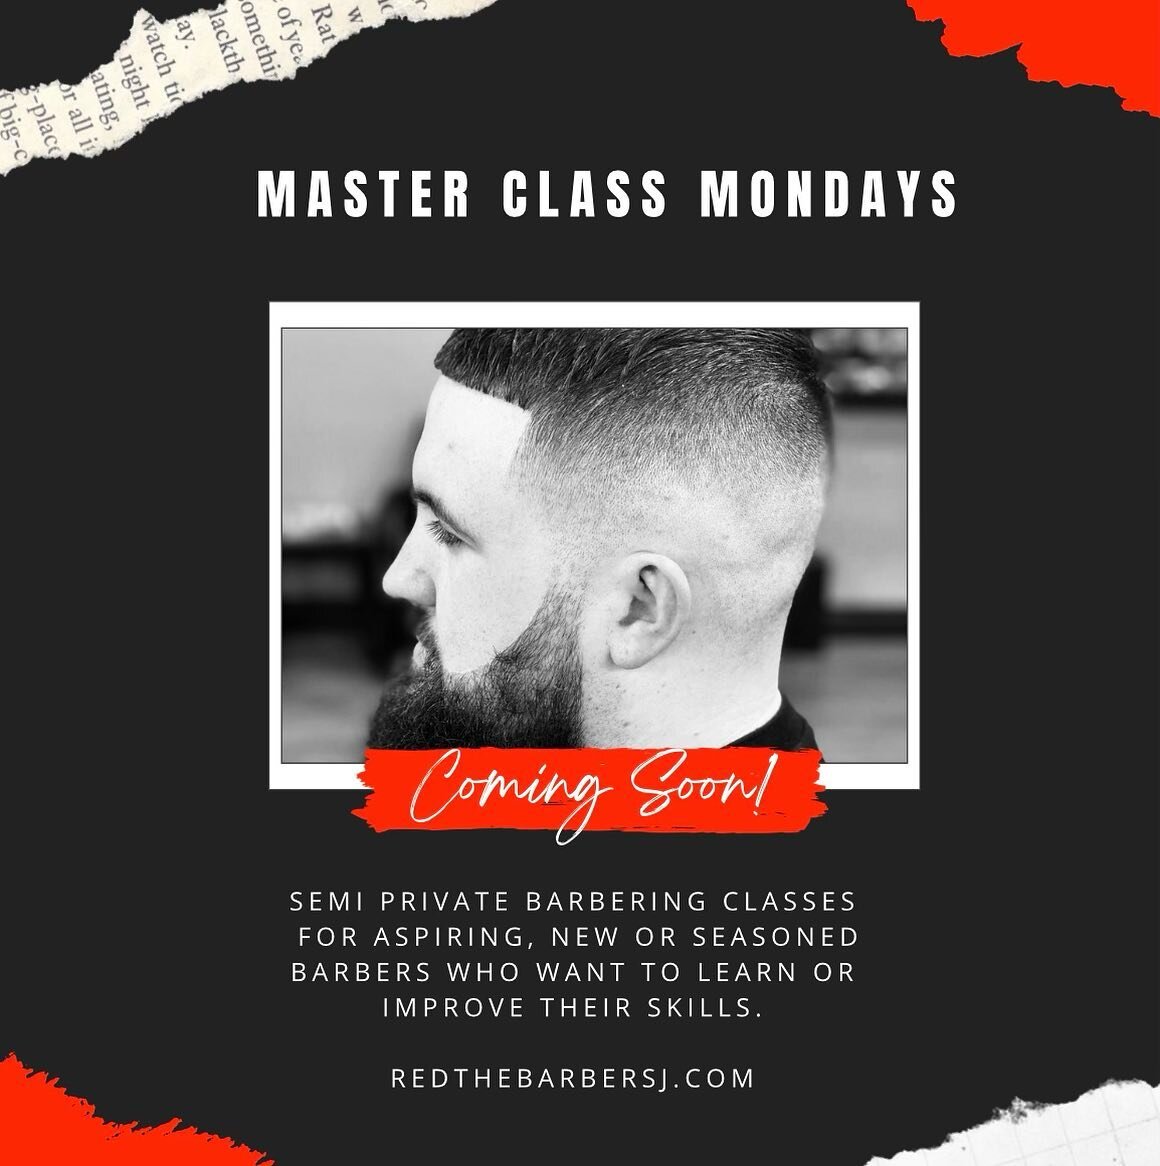 REDTHEBARBERSJ.COM 

Always been one to help out and why not help out the next up coming barber. If you&rsquo;re in school or young in this career and wanna get better. Then sign up now for MASTER CLASS MONDAYS
#sanjose#sanfrancisco#sacramento#modest